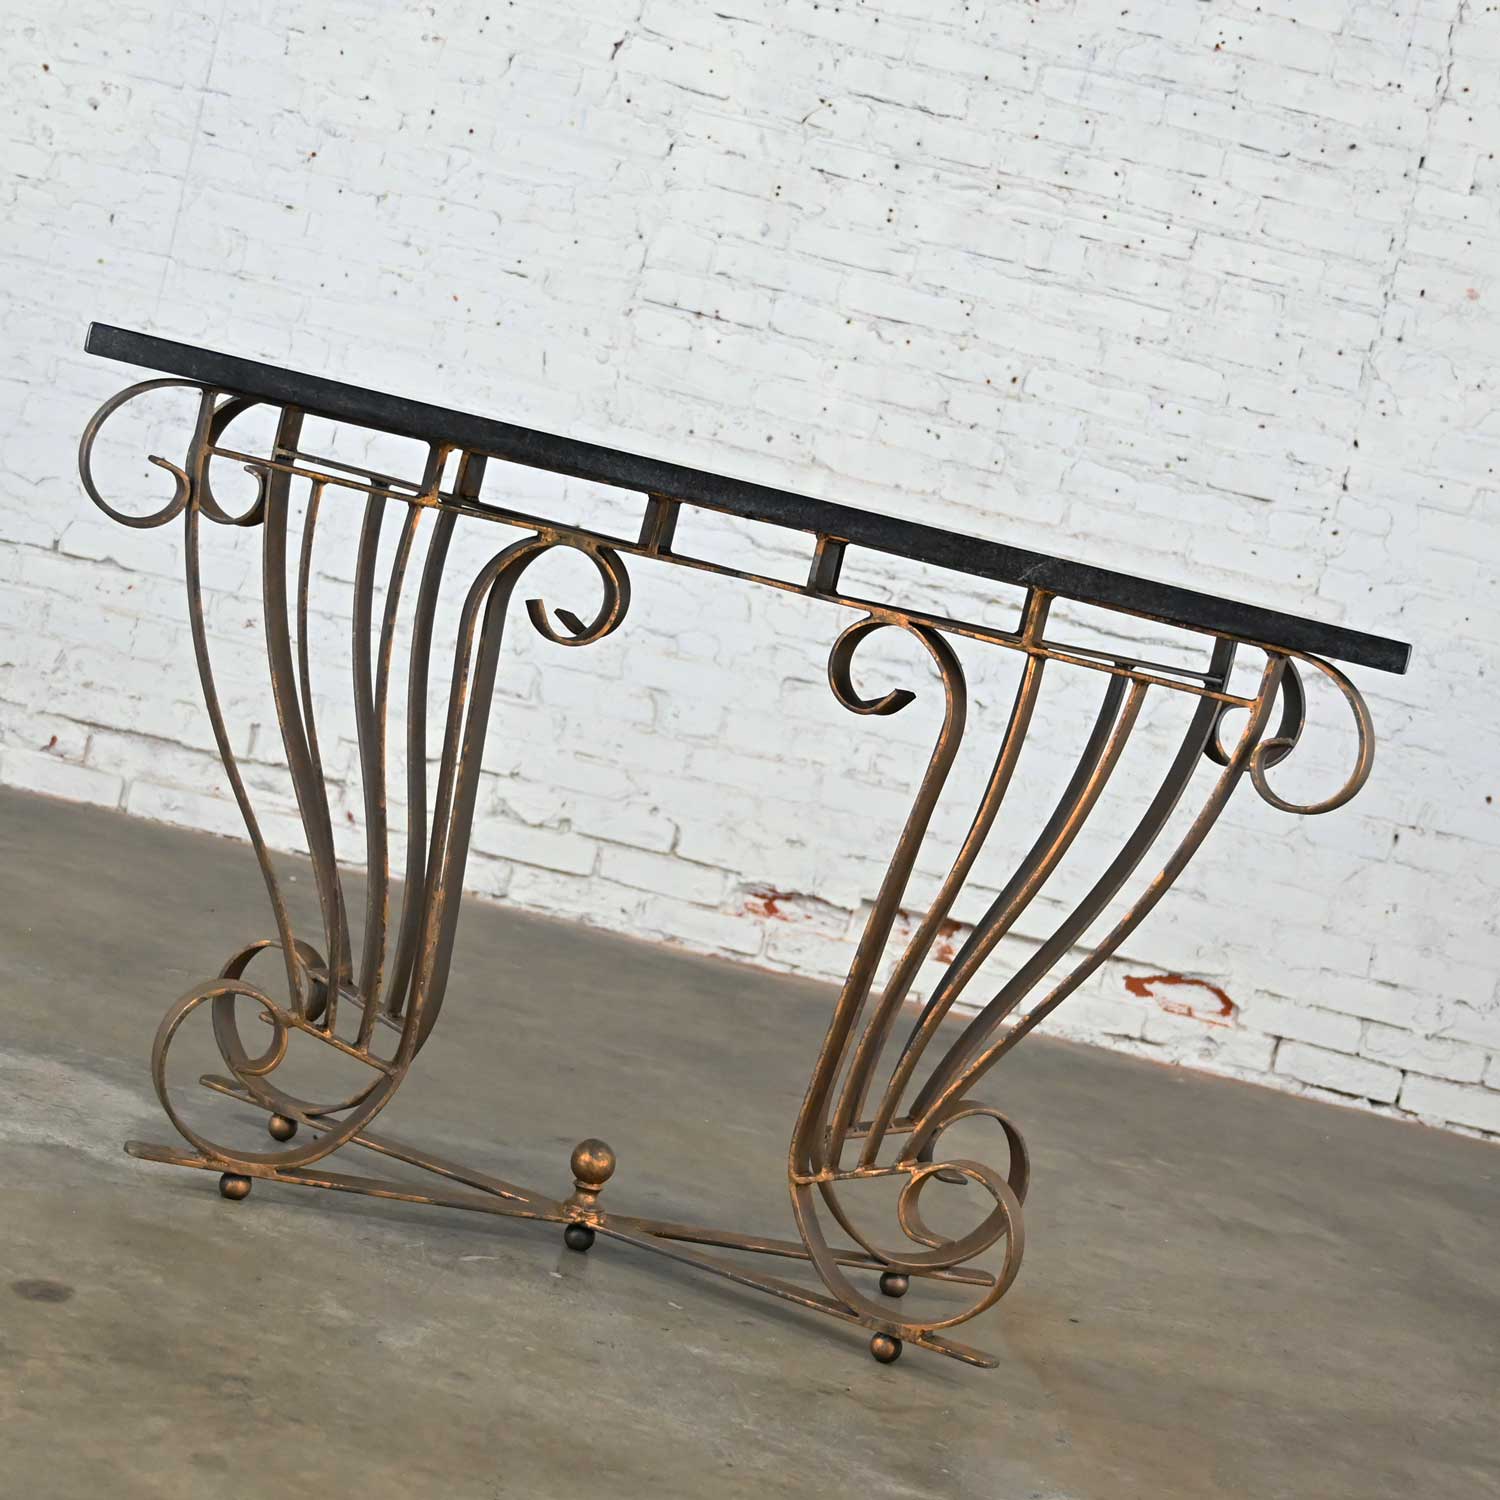 Vintage Art Deco Style Wrought Iron Granite Top Sofa Console Table